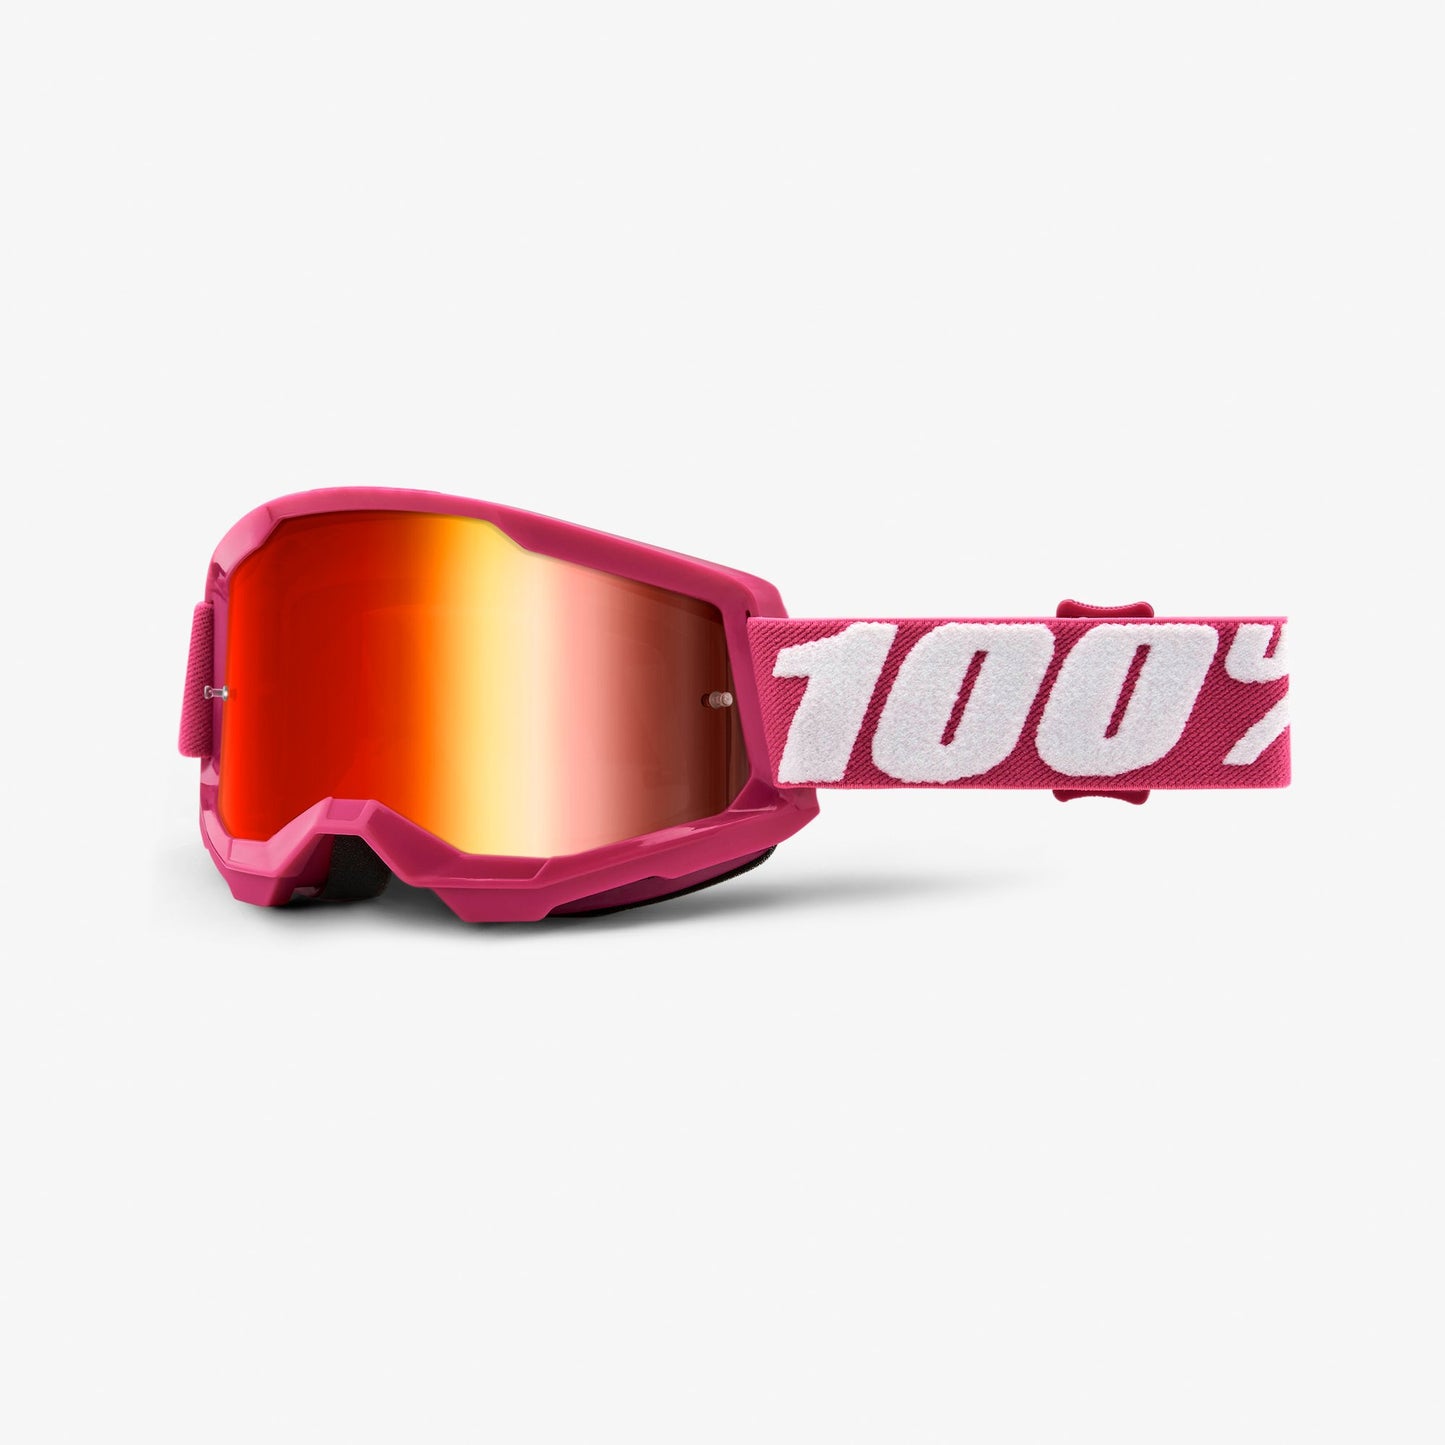 100% Strata 2 Goggles - Fletcher - Red Mirror Lens - Youth 50032-00006